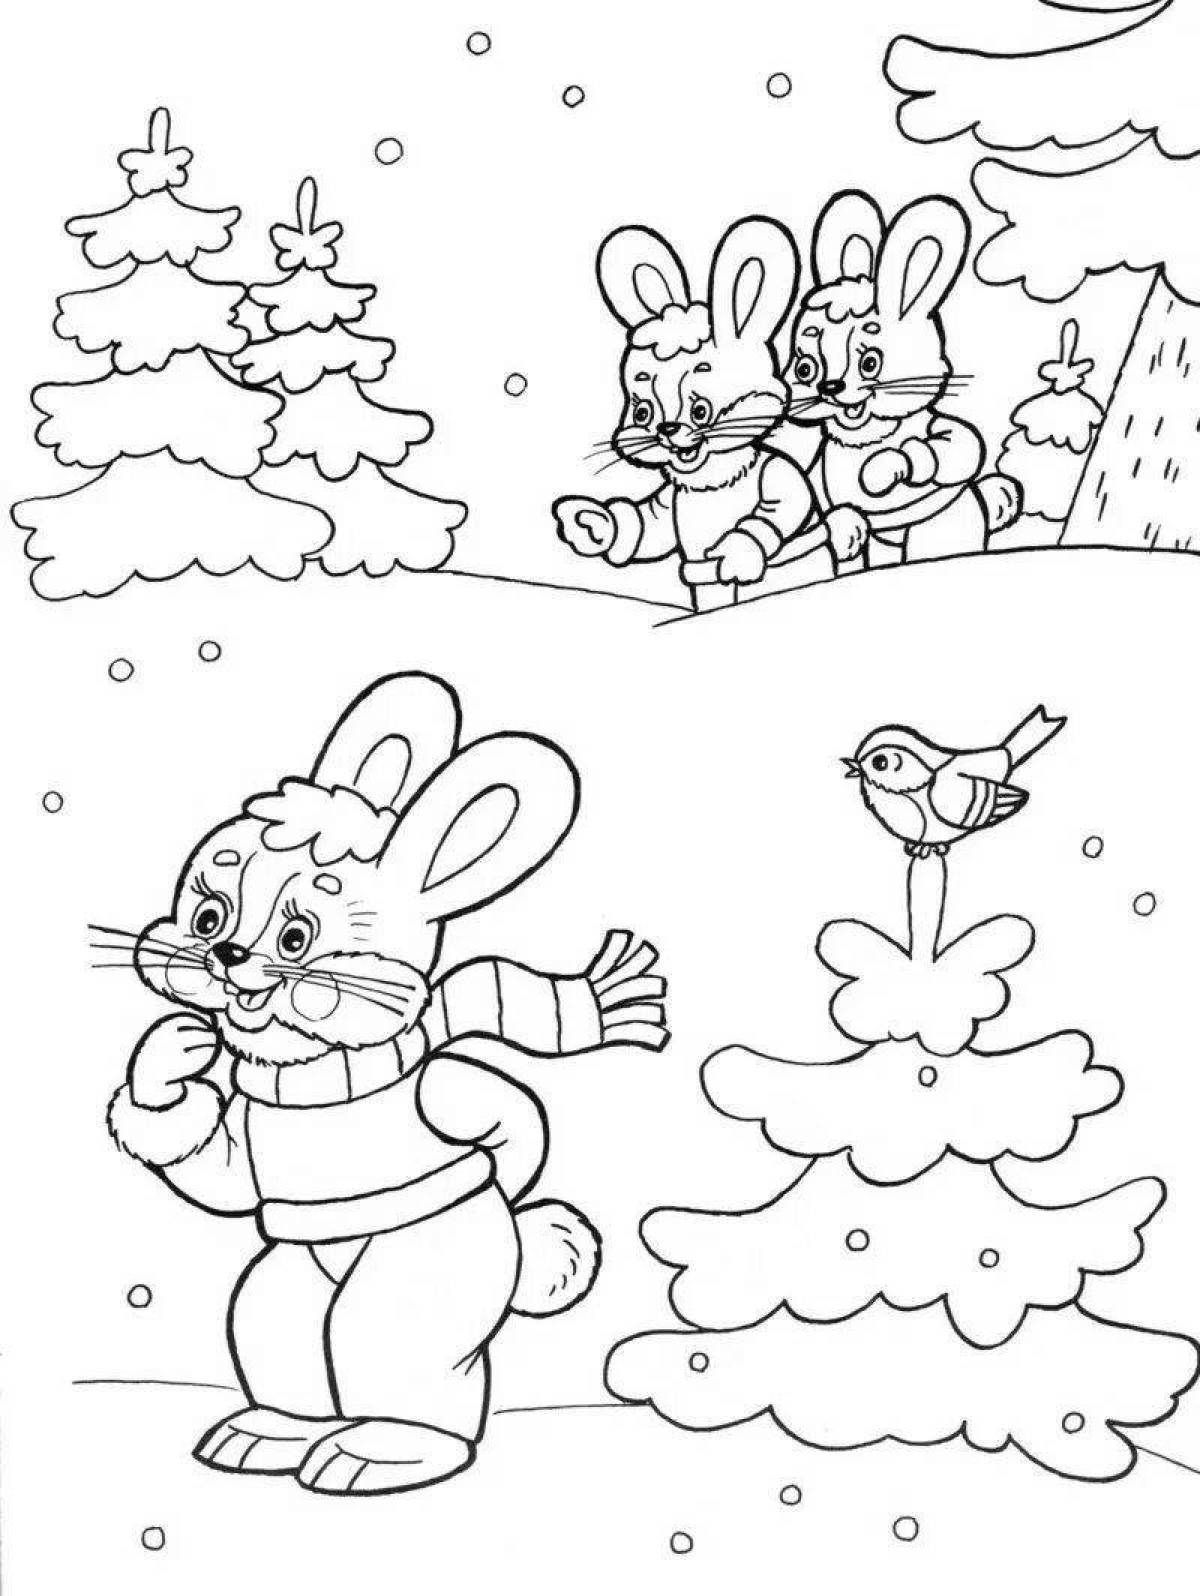 Exquisite winter forest coloring book for kids